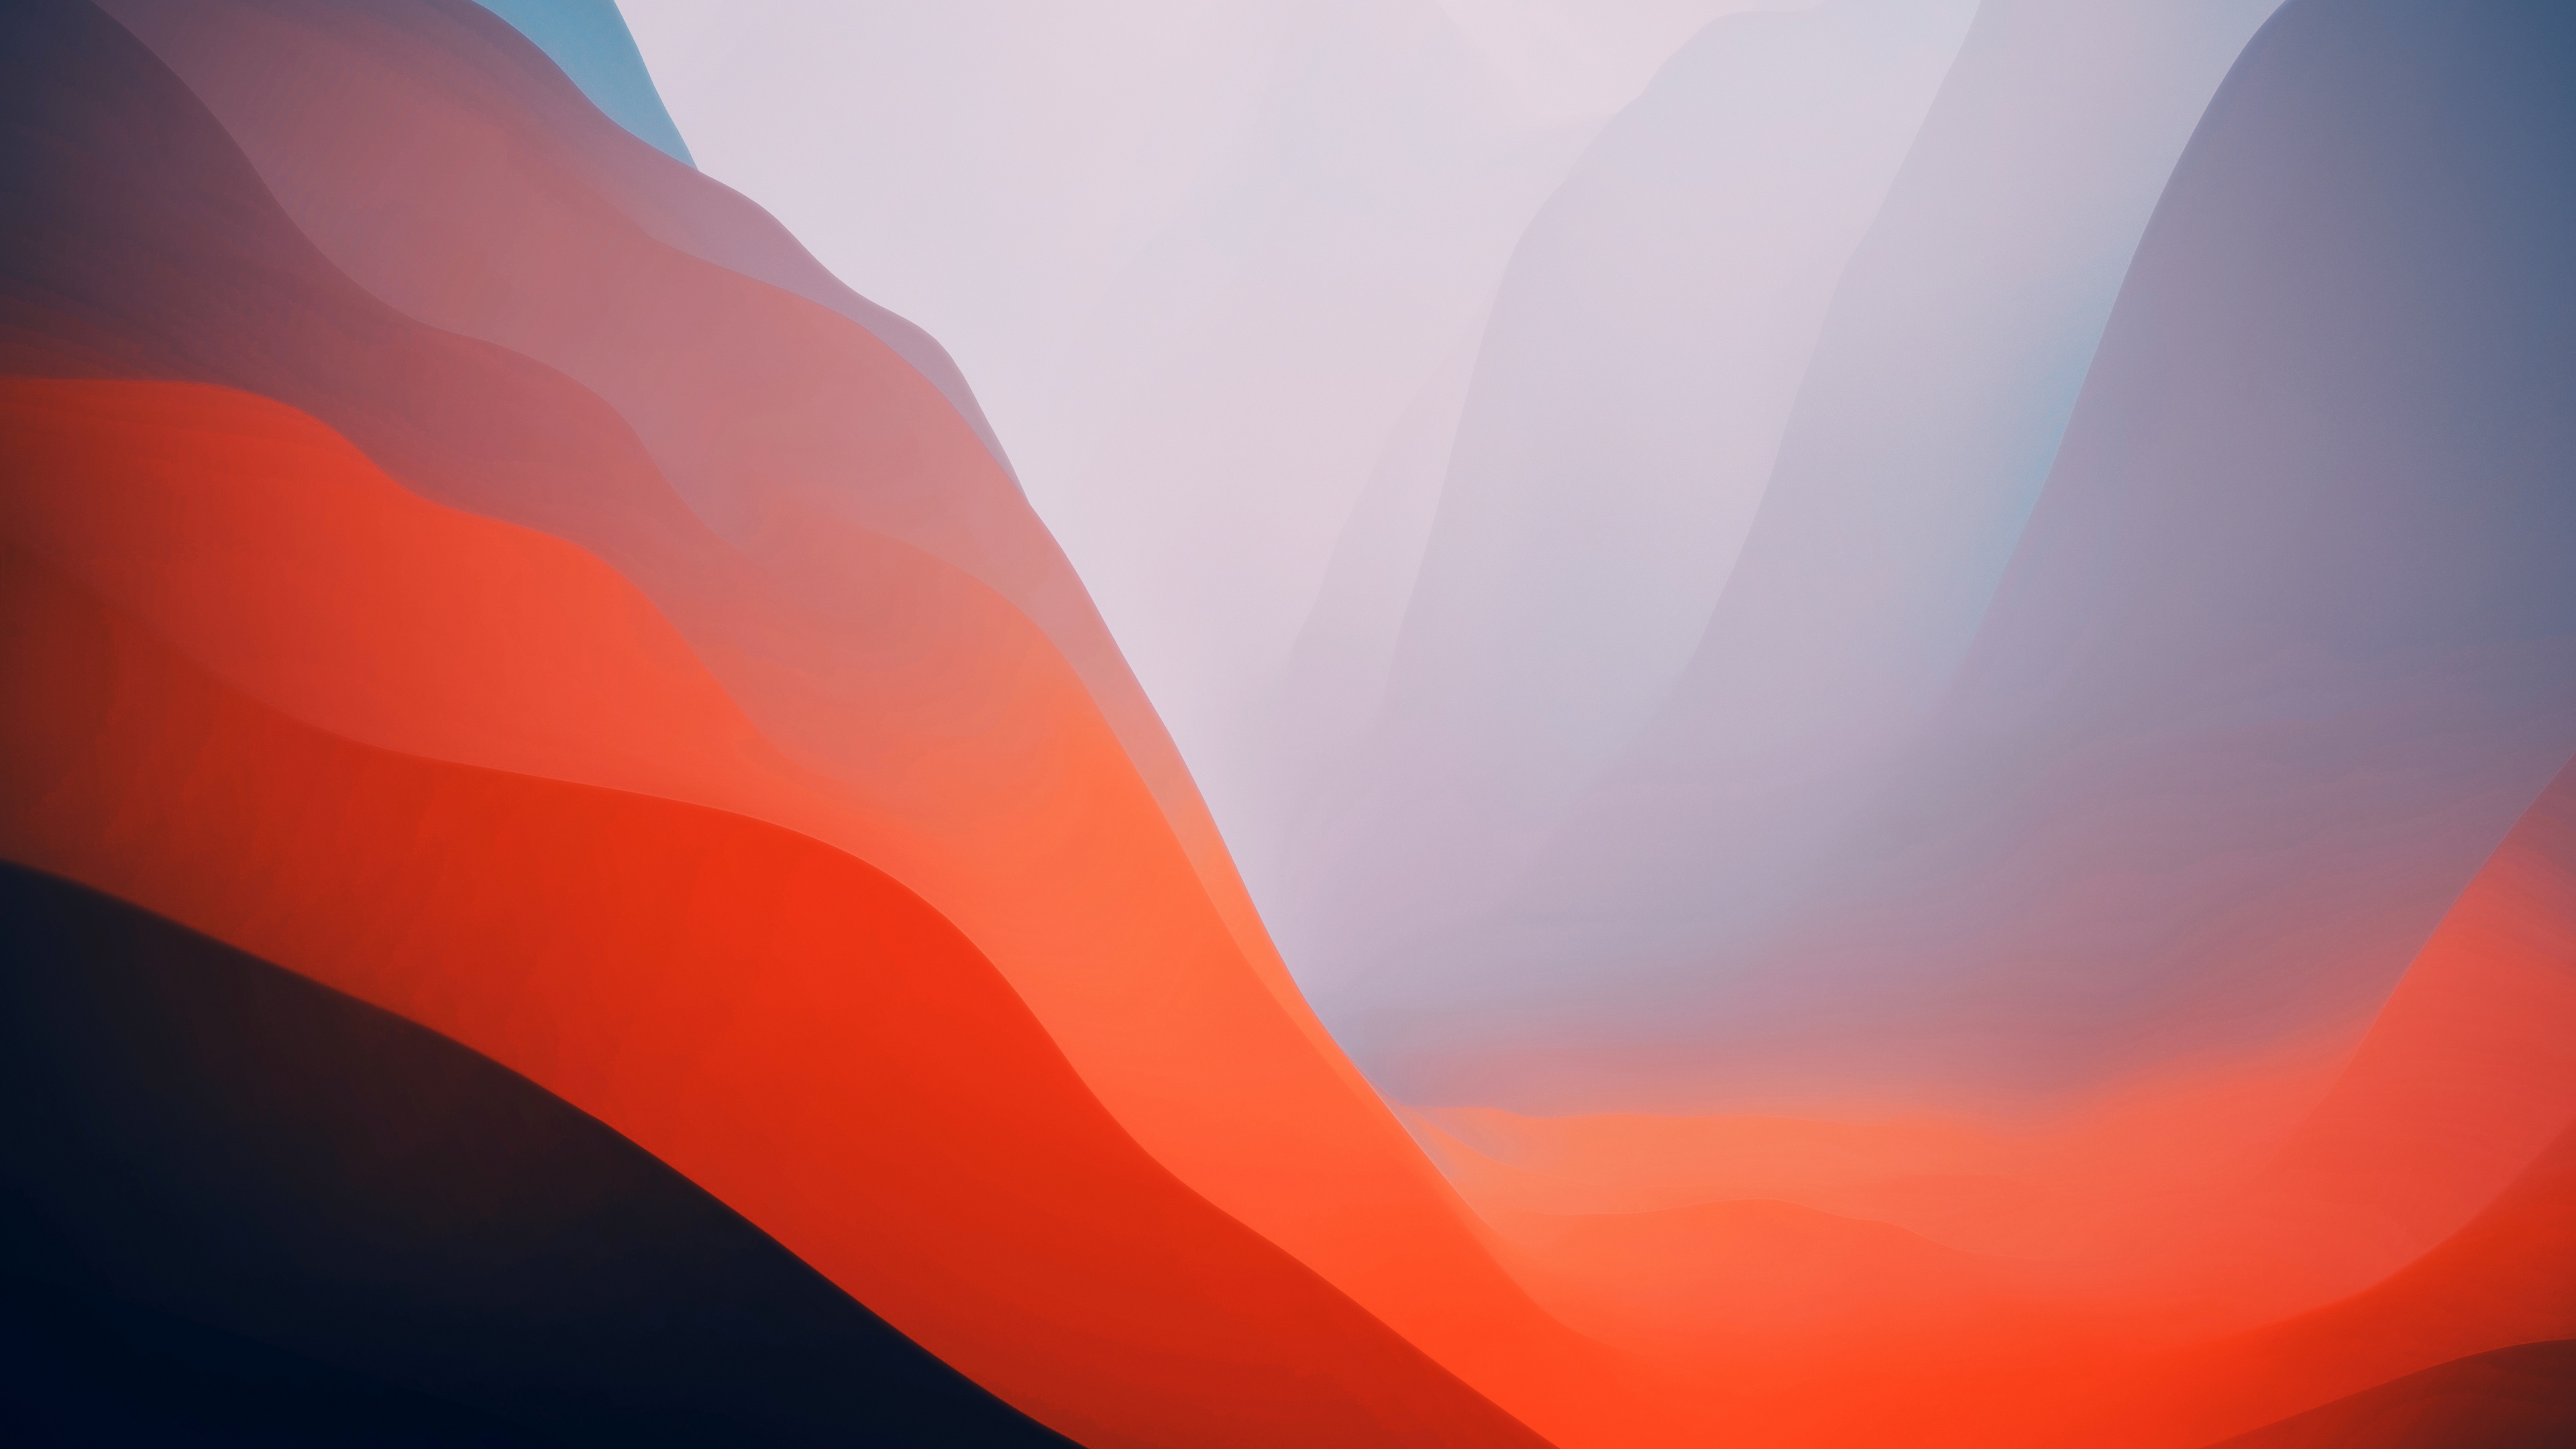 macOS Big Sur 1101 includes even more new wallpapers download them here   9to5Mac